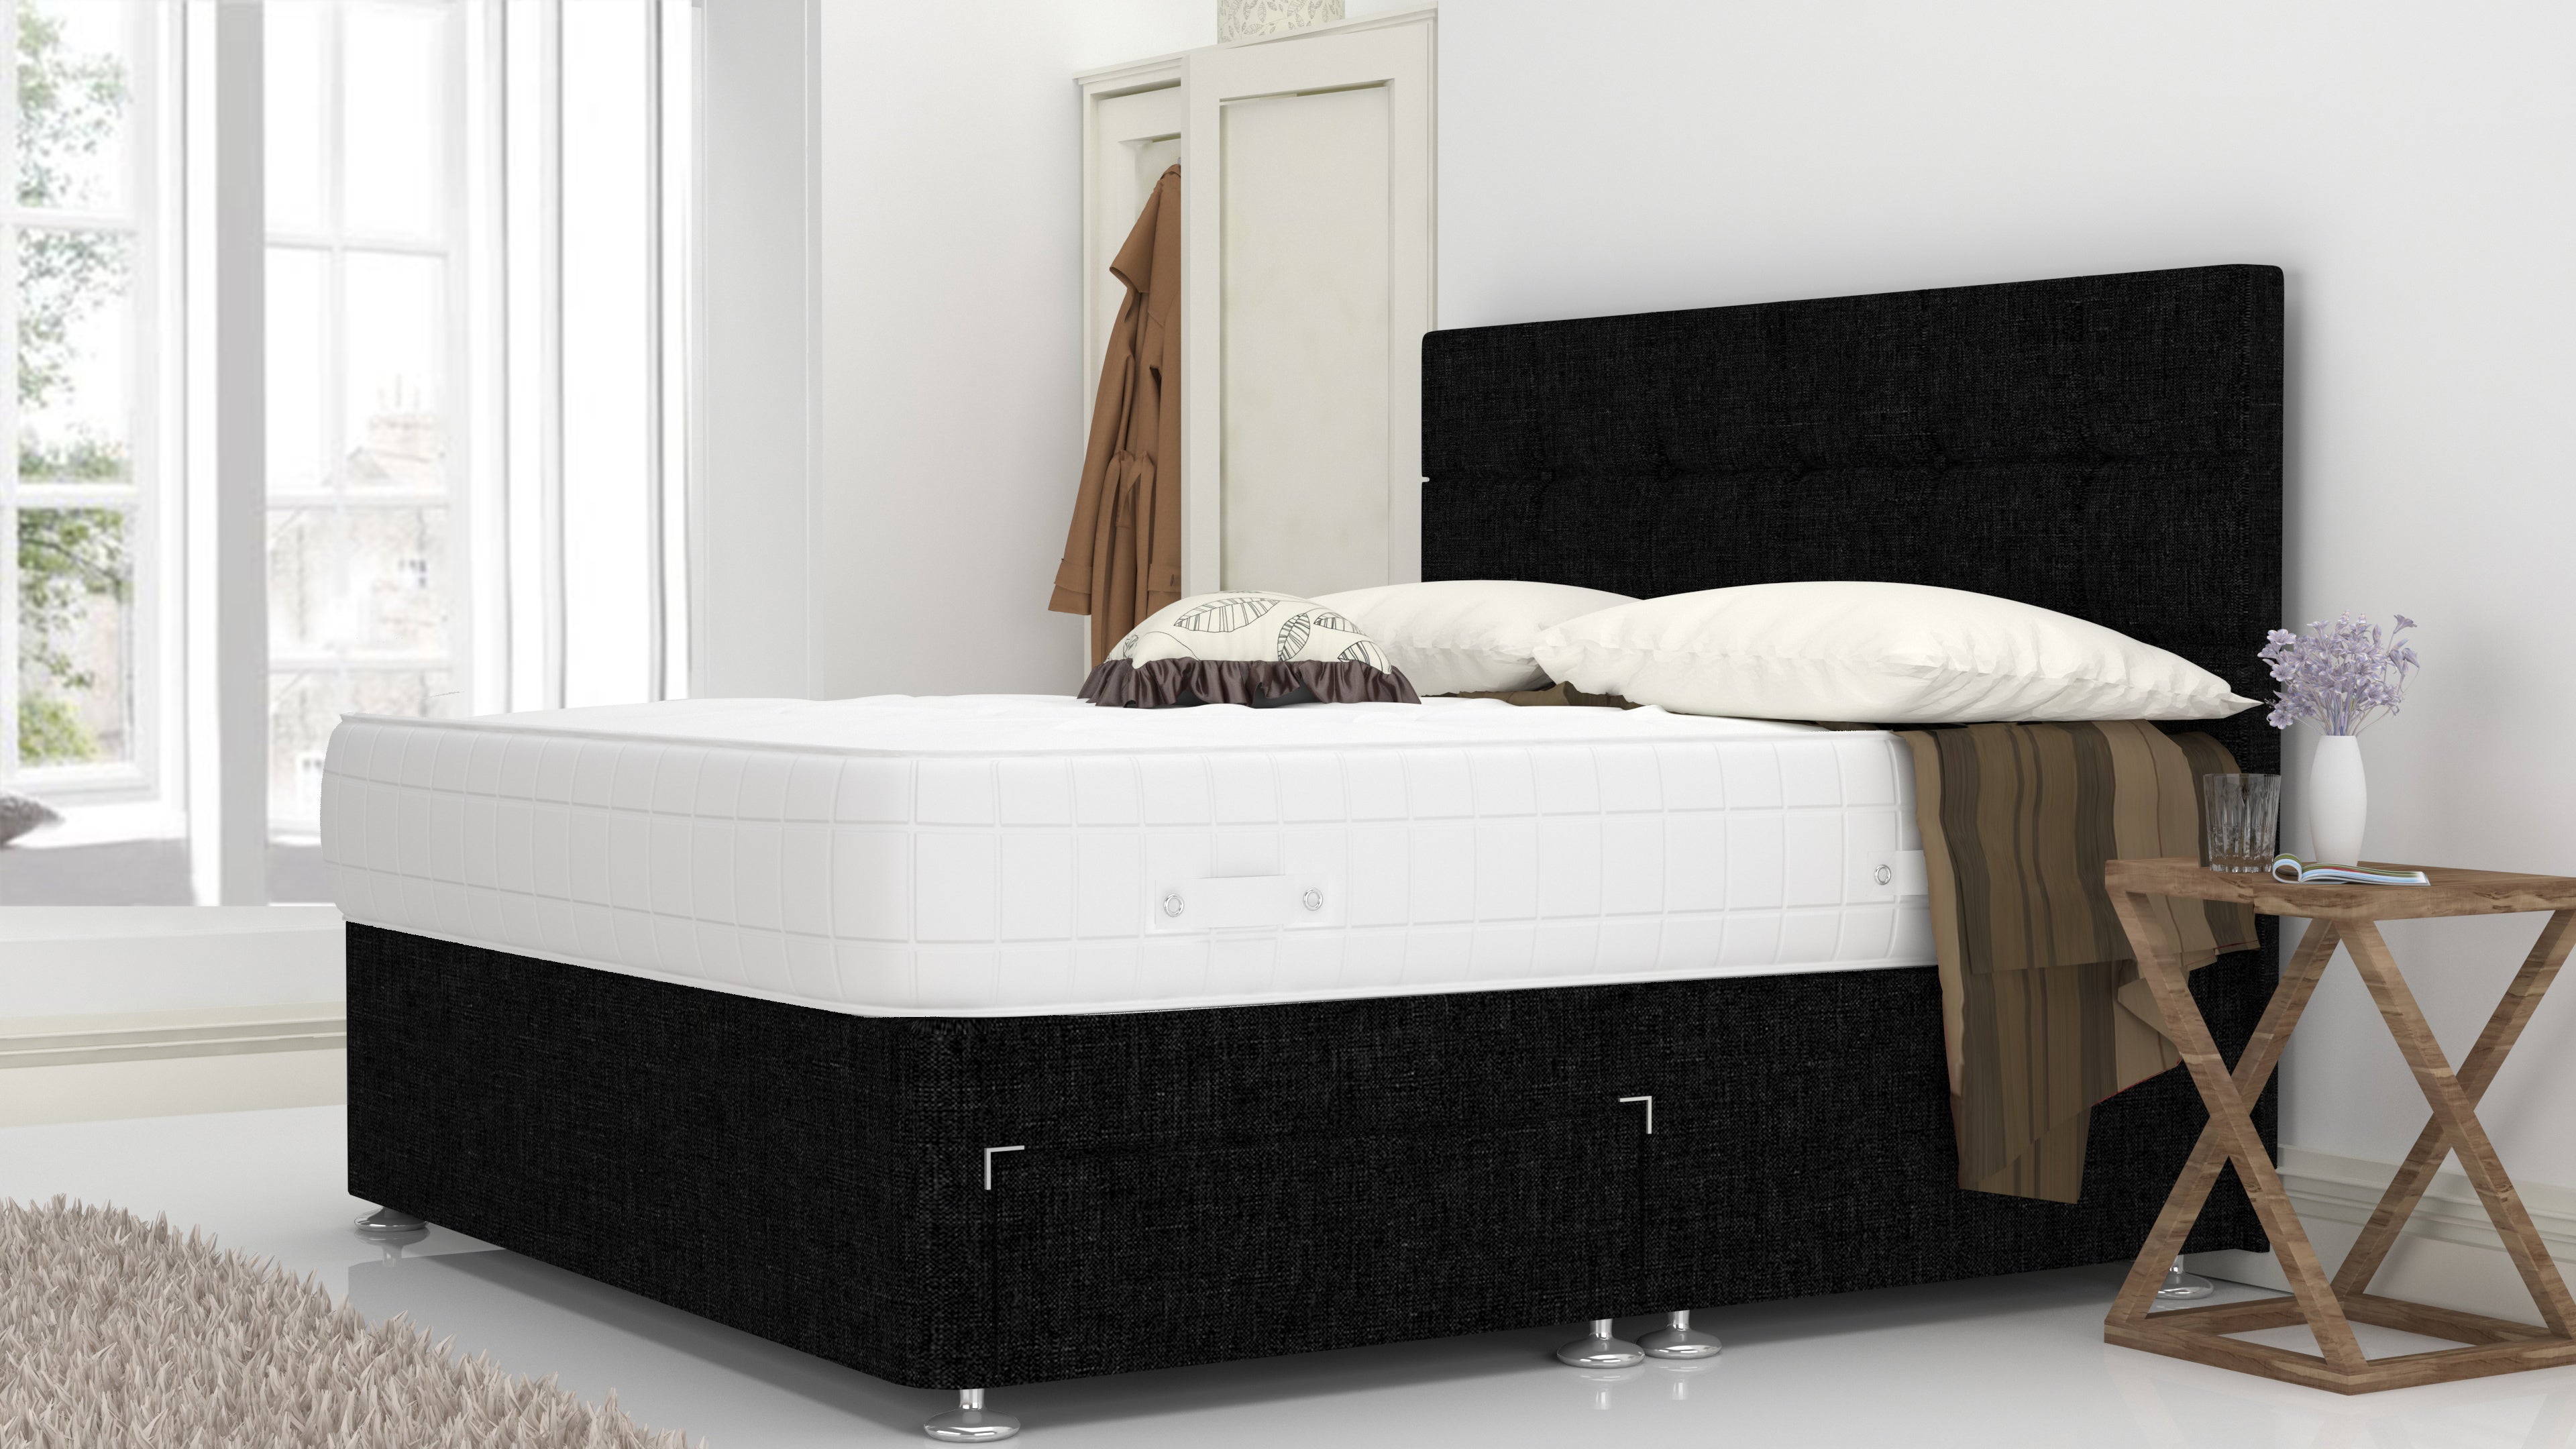 Black Venice 5 Feet Divan Bed Set With Cube Headboard (Included Feet) And Free Orthopedic Mattress.